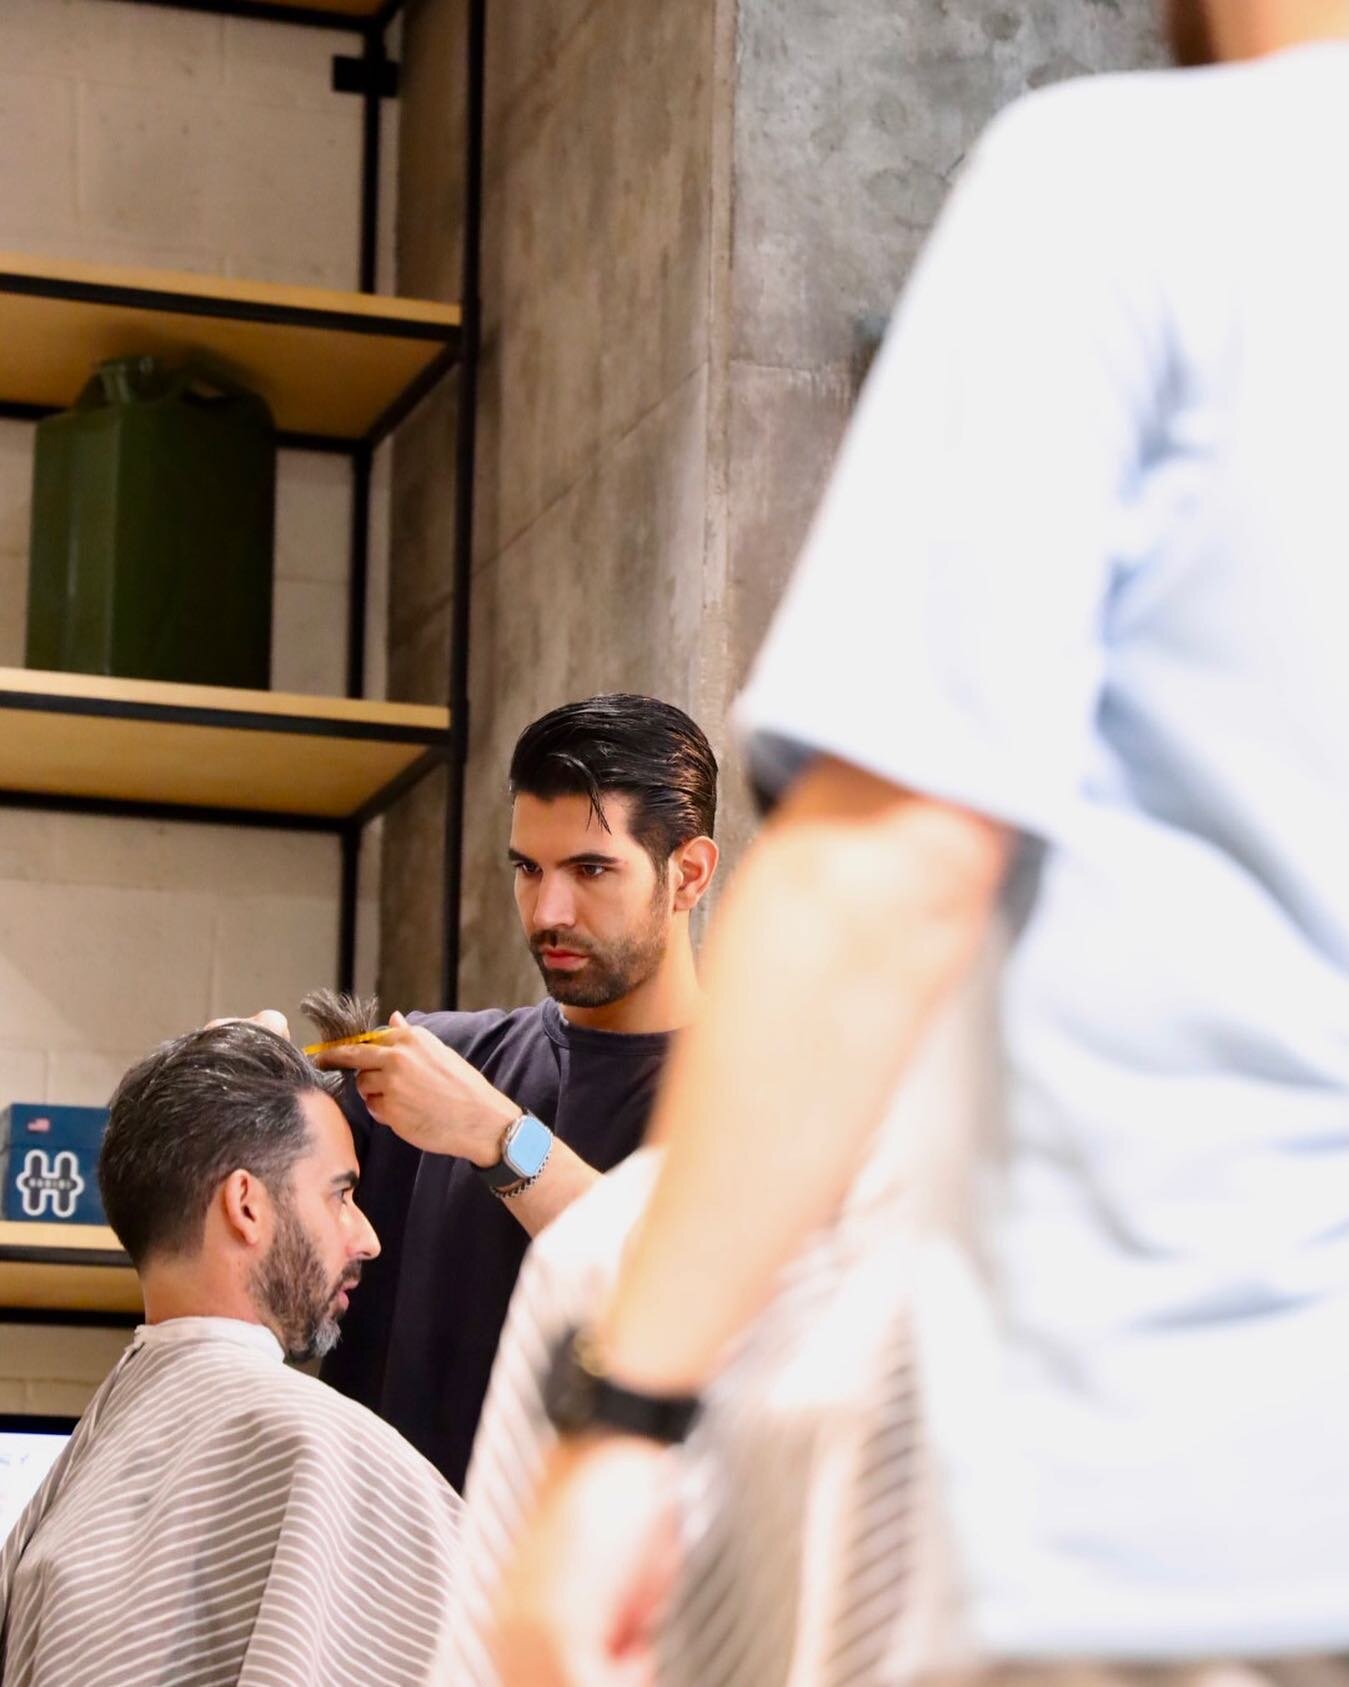 &quot;Precision in every snip, dedication in every strand. Arsalan, the master of detail, is here to craft your perfect look. Trust the serious face behind the magic ✂️💪 #weareakin #AkinBarber #AttentionToDetail #SeriousSkills&quot;